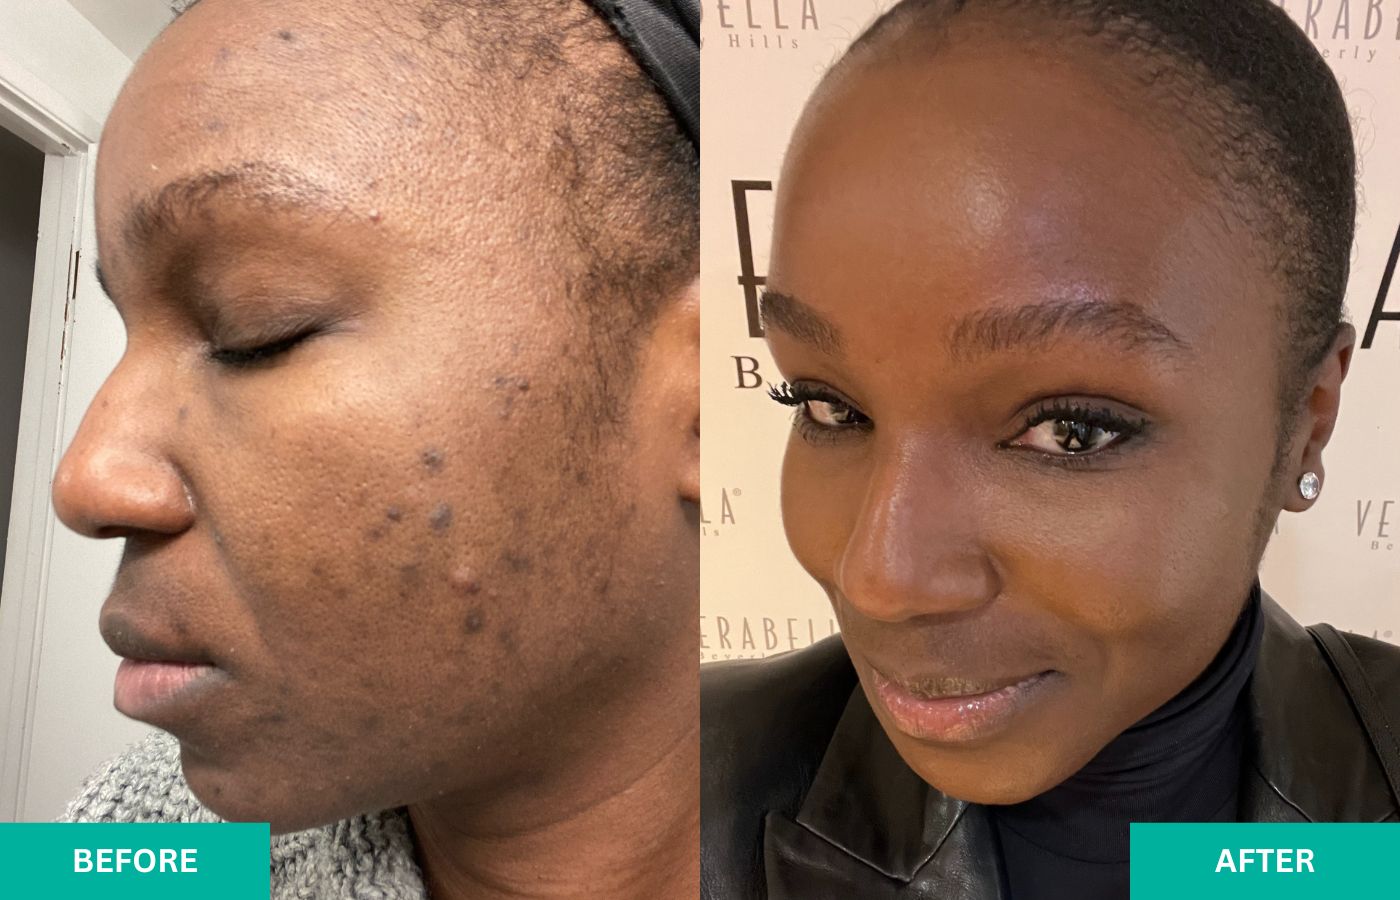 before-and-after-verabella-acne-8